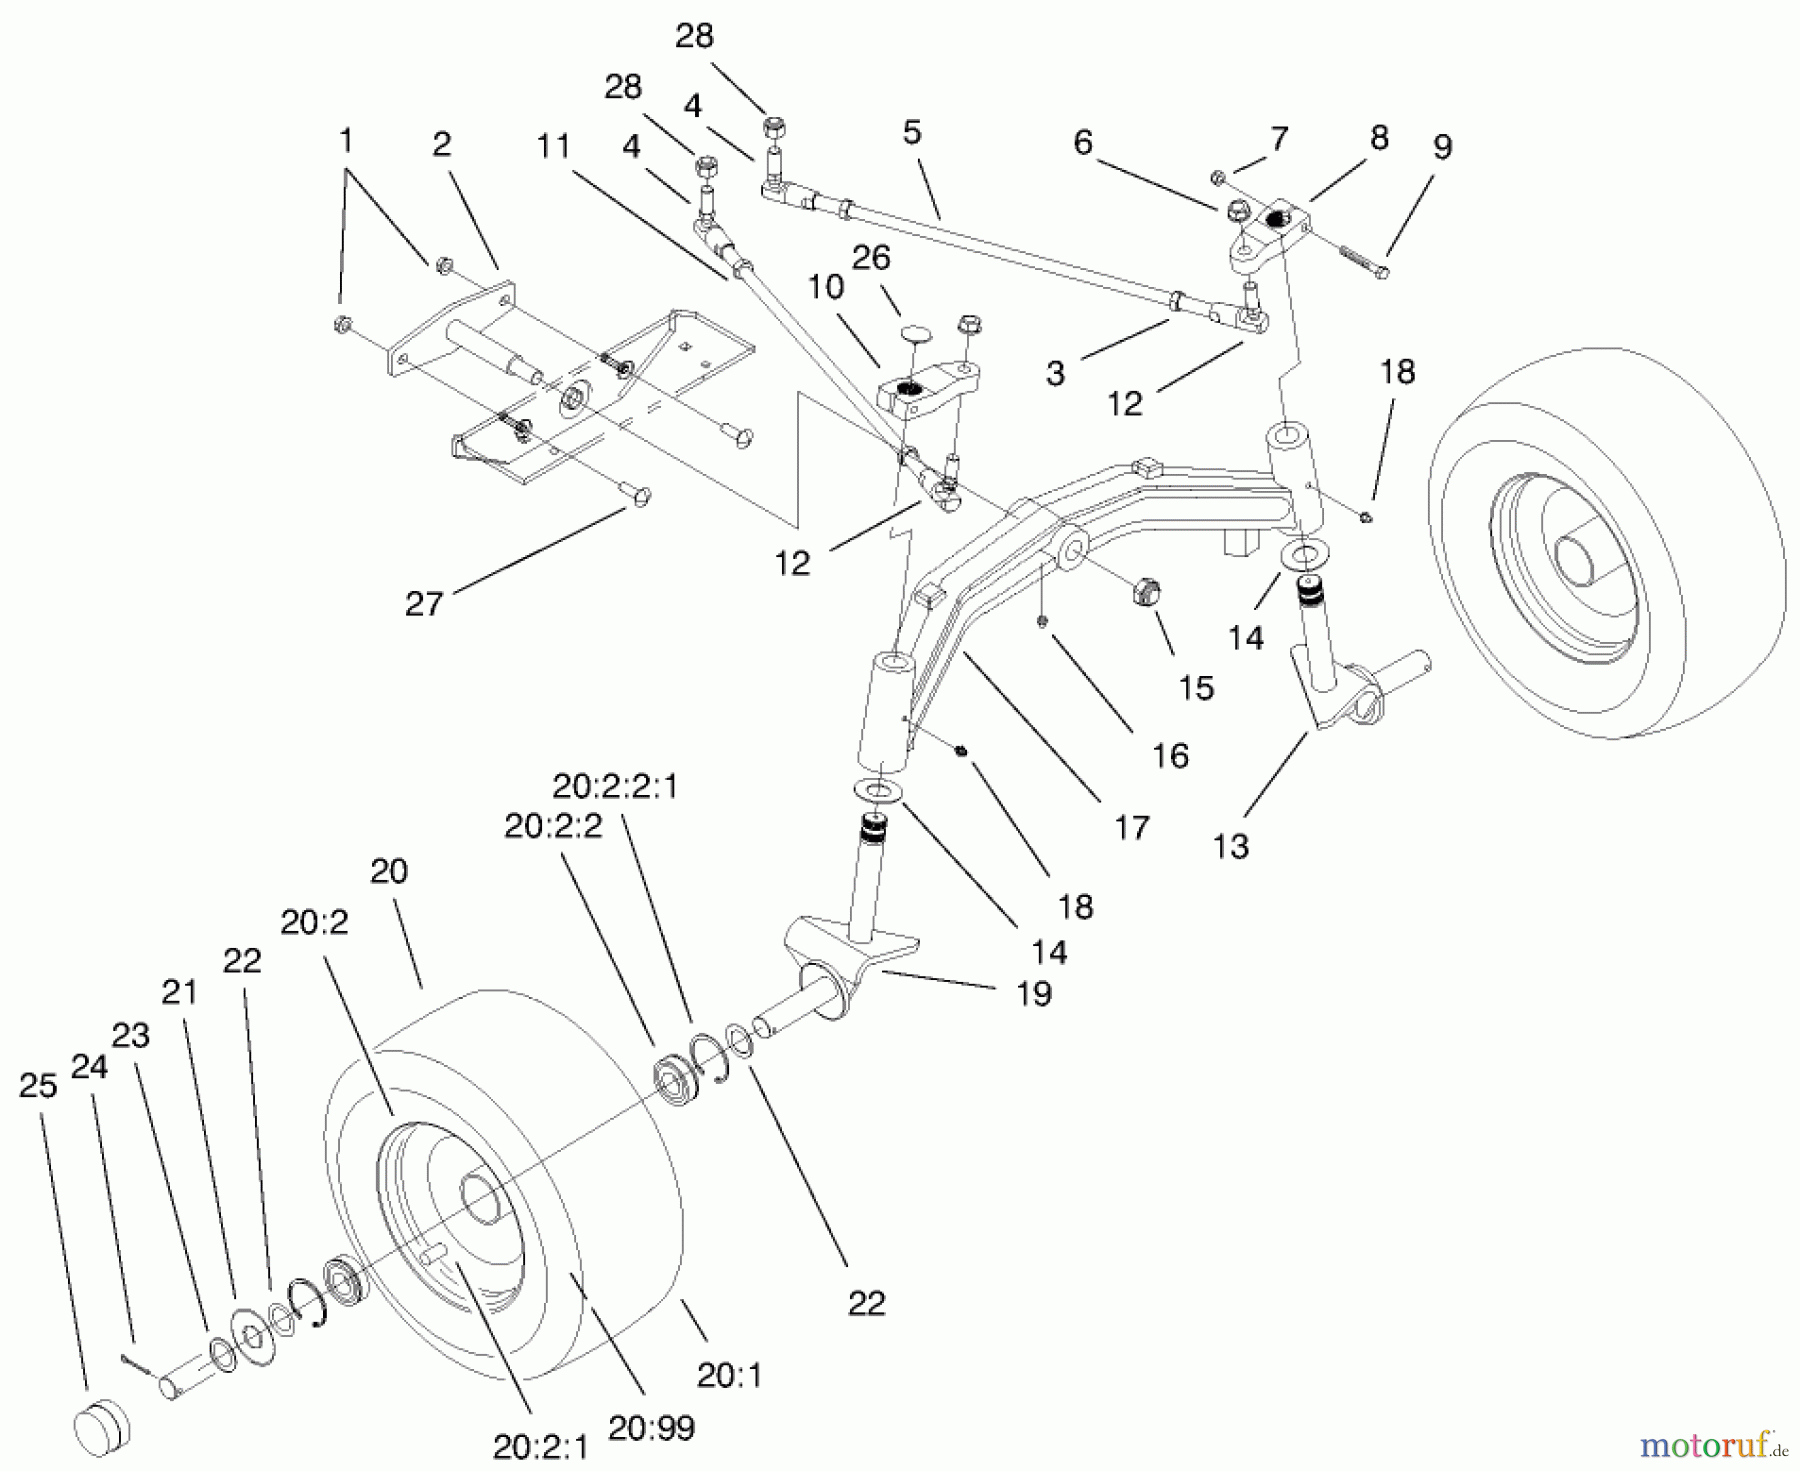  Toro Neu Mowers, Lawn & Garden Tractor Seite 1 73561 (522xi) - Toro 522xi Garden Tractor, 1999 (9900001-9999999) TIE RODS, SPINDLE, & FRONT AXLE ASSEMBLY